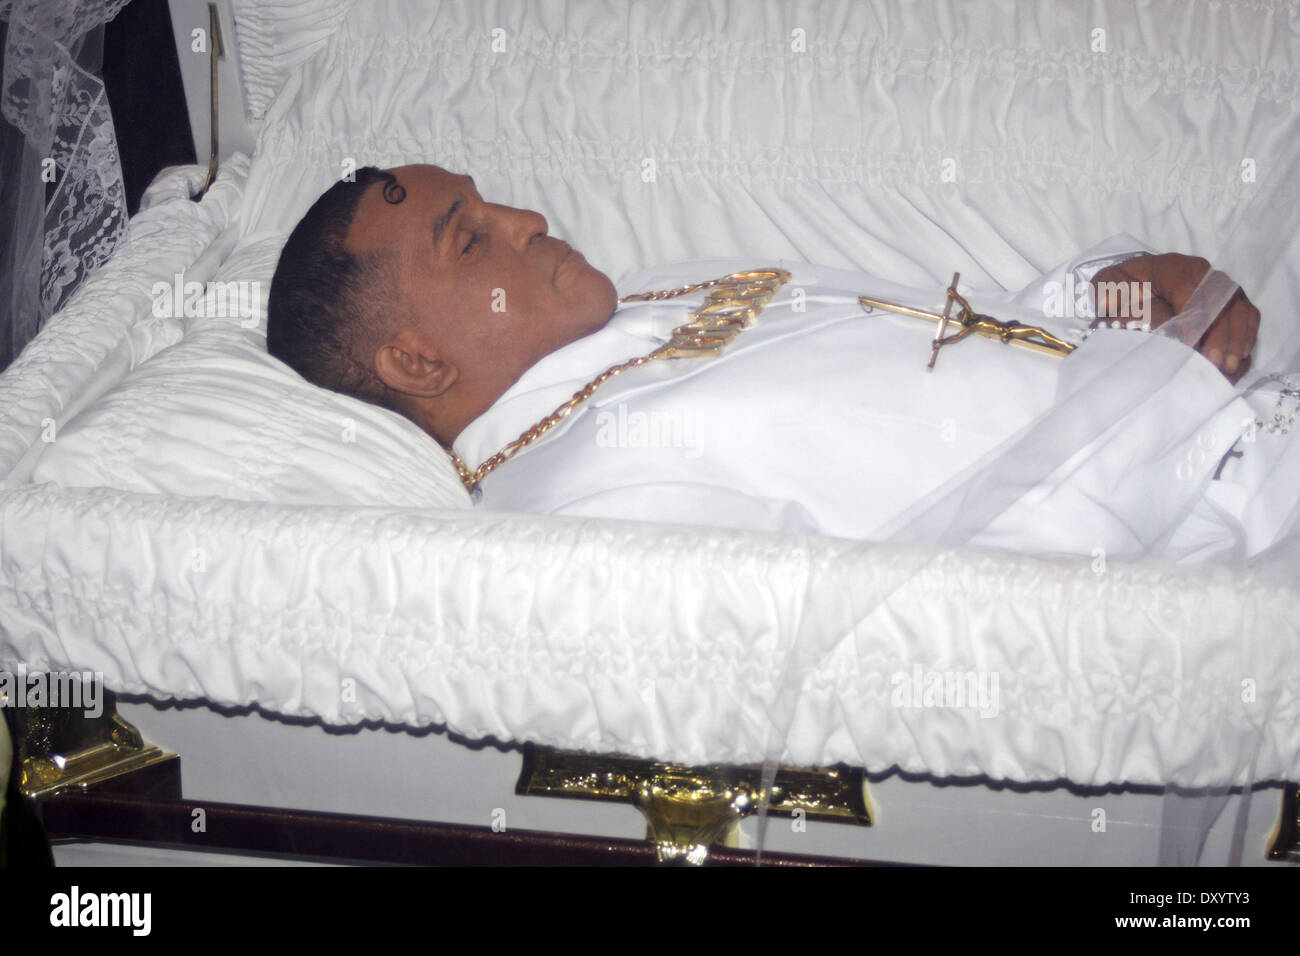 The Body of boxing legend Hector Macho Camacho lies in state during a public memorial service at the Department of Sports and Recreation on November 27 2012 in San Juan Puerto Rico. Camacho died after being removed from life support after being shot on No Stock Photo